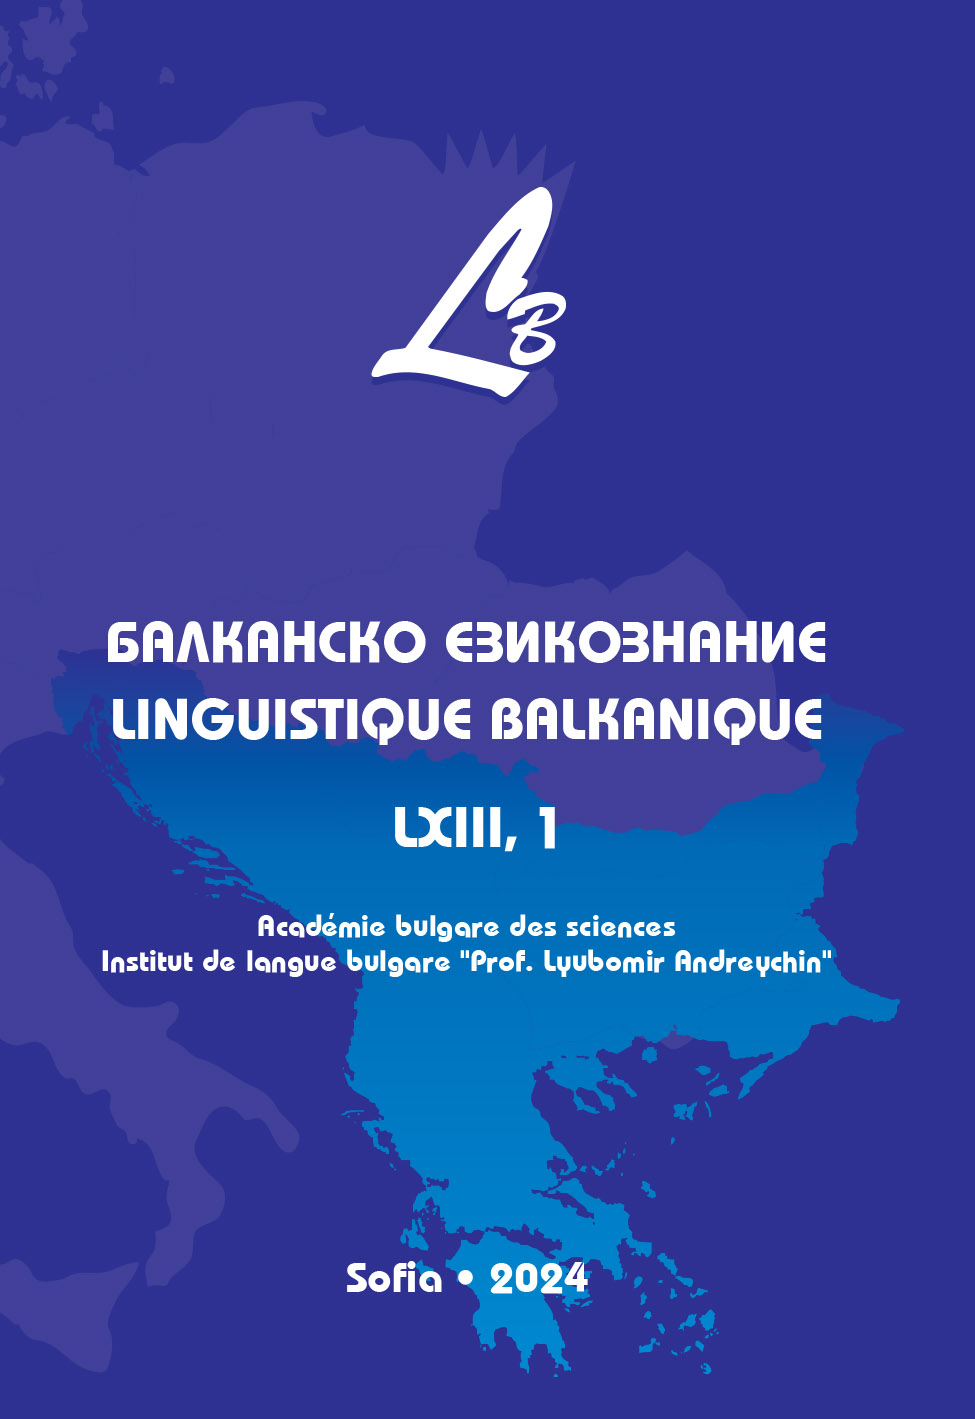 Review of the linguistic materials contained in volume 2, section 2, of the two-volume Makedoniya. Istoriya i kultura ot drevnostta do dnes [Macedonia. History and Culture from Ancient Times to the Present] (2023); Ezikoznanie [Linguistics], ed. Geor Cover Image